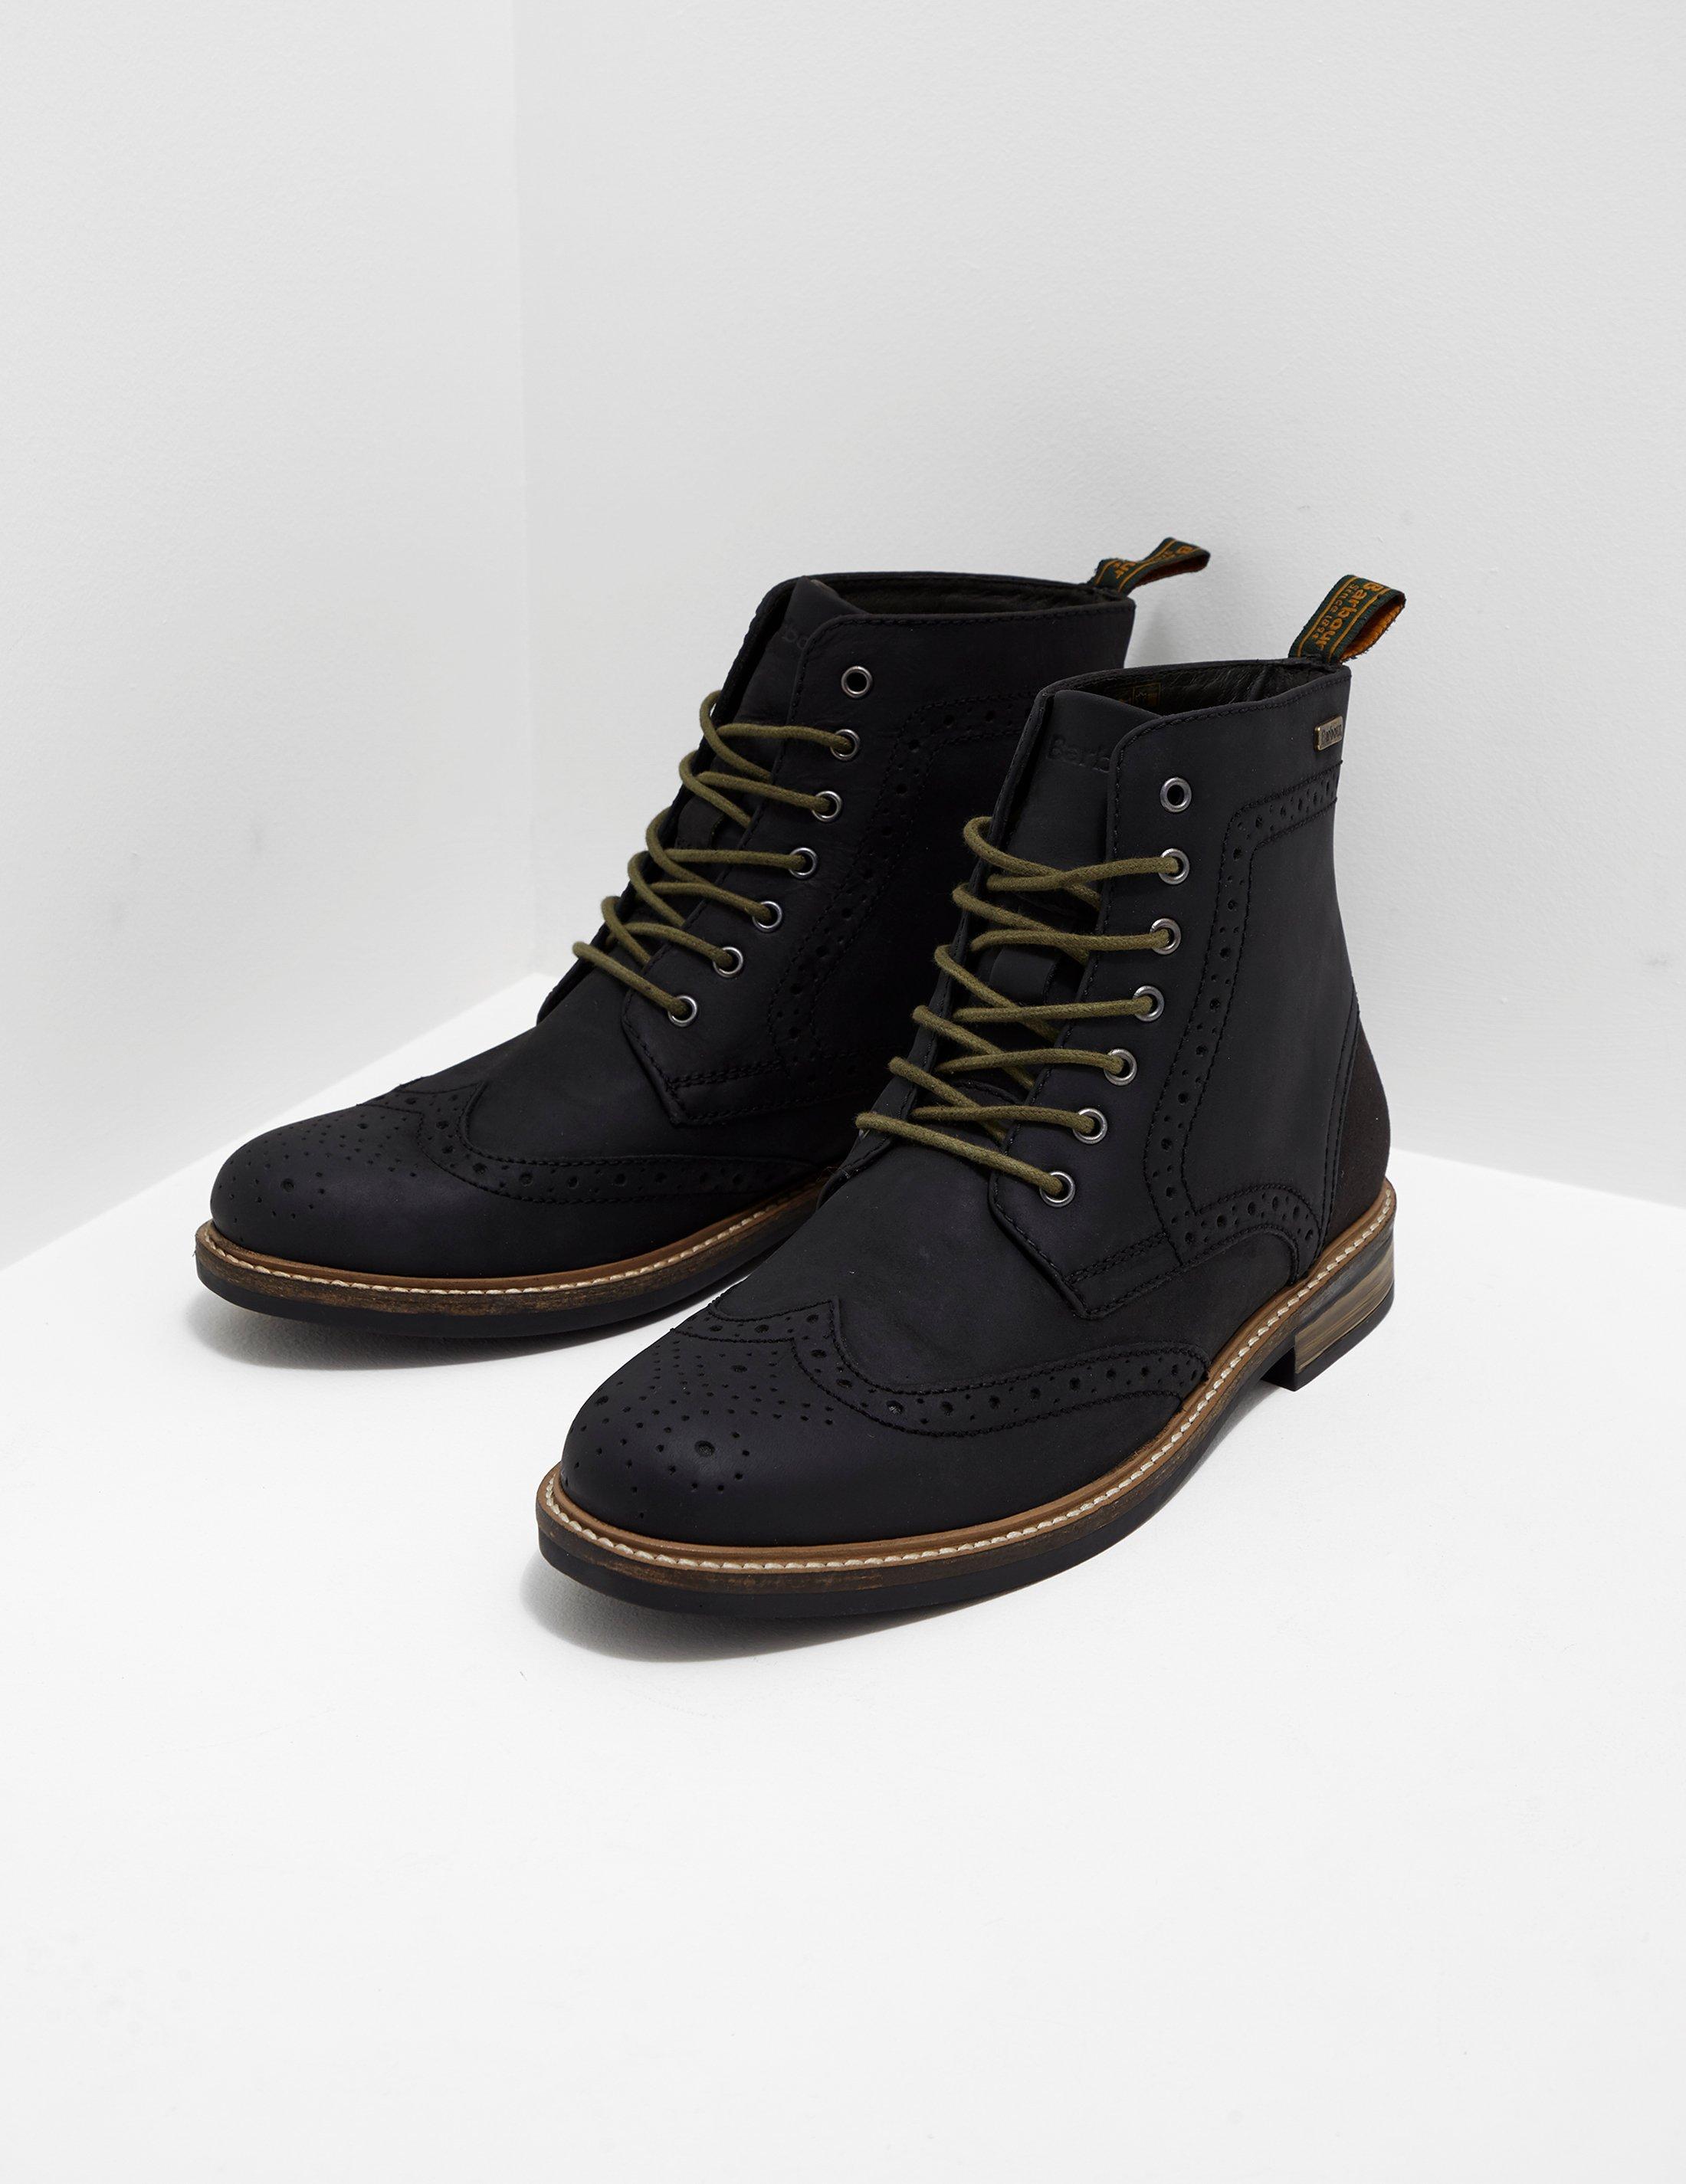 Barbour Leather Belsay Boots in Black 